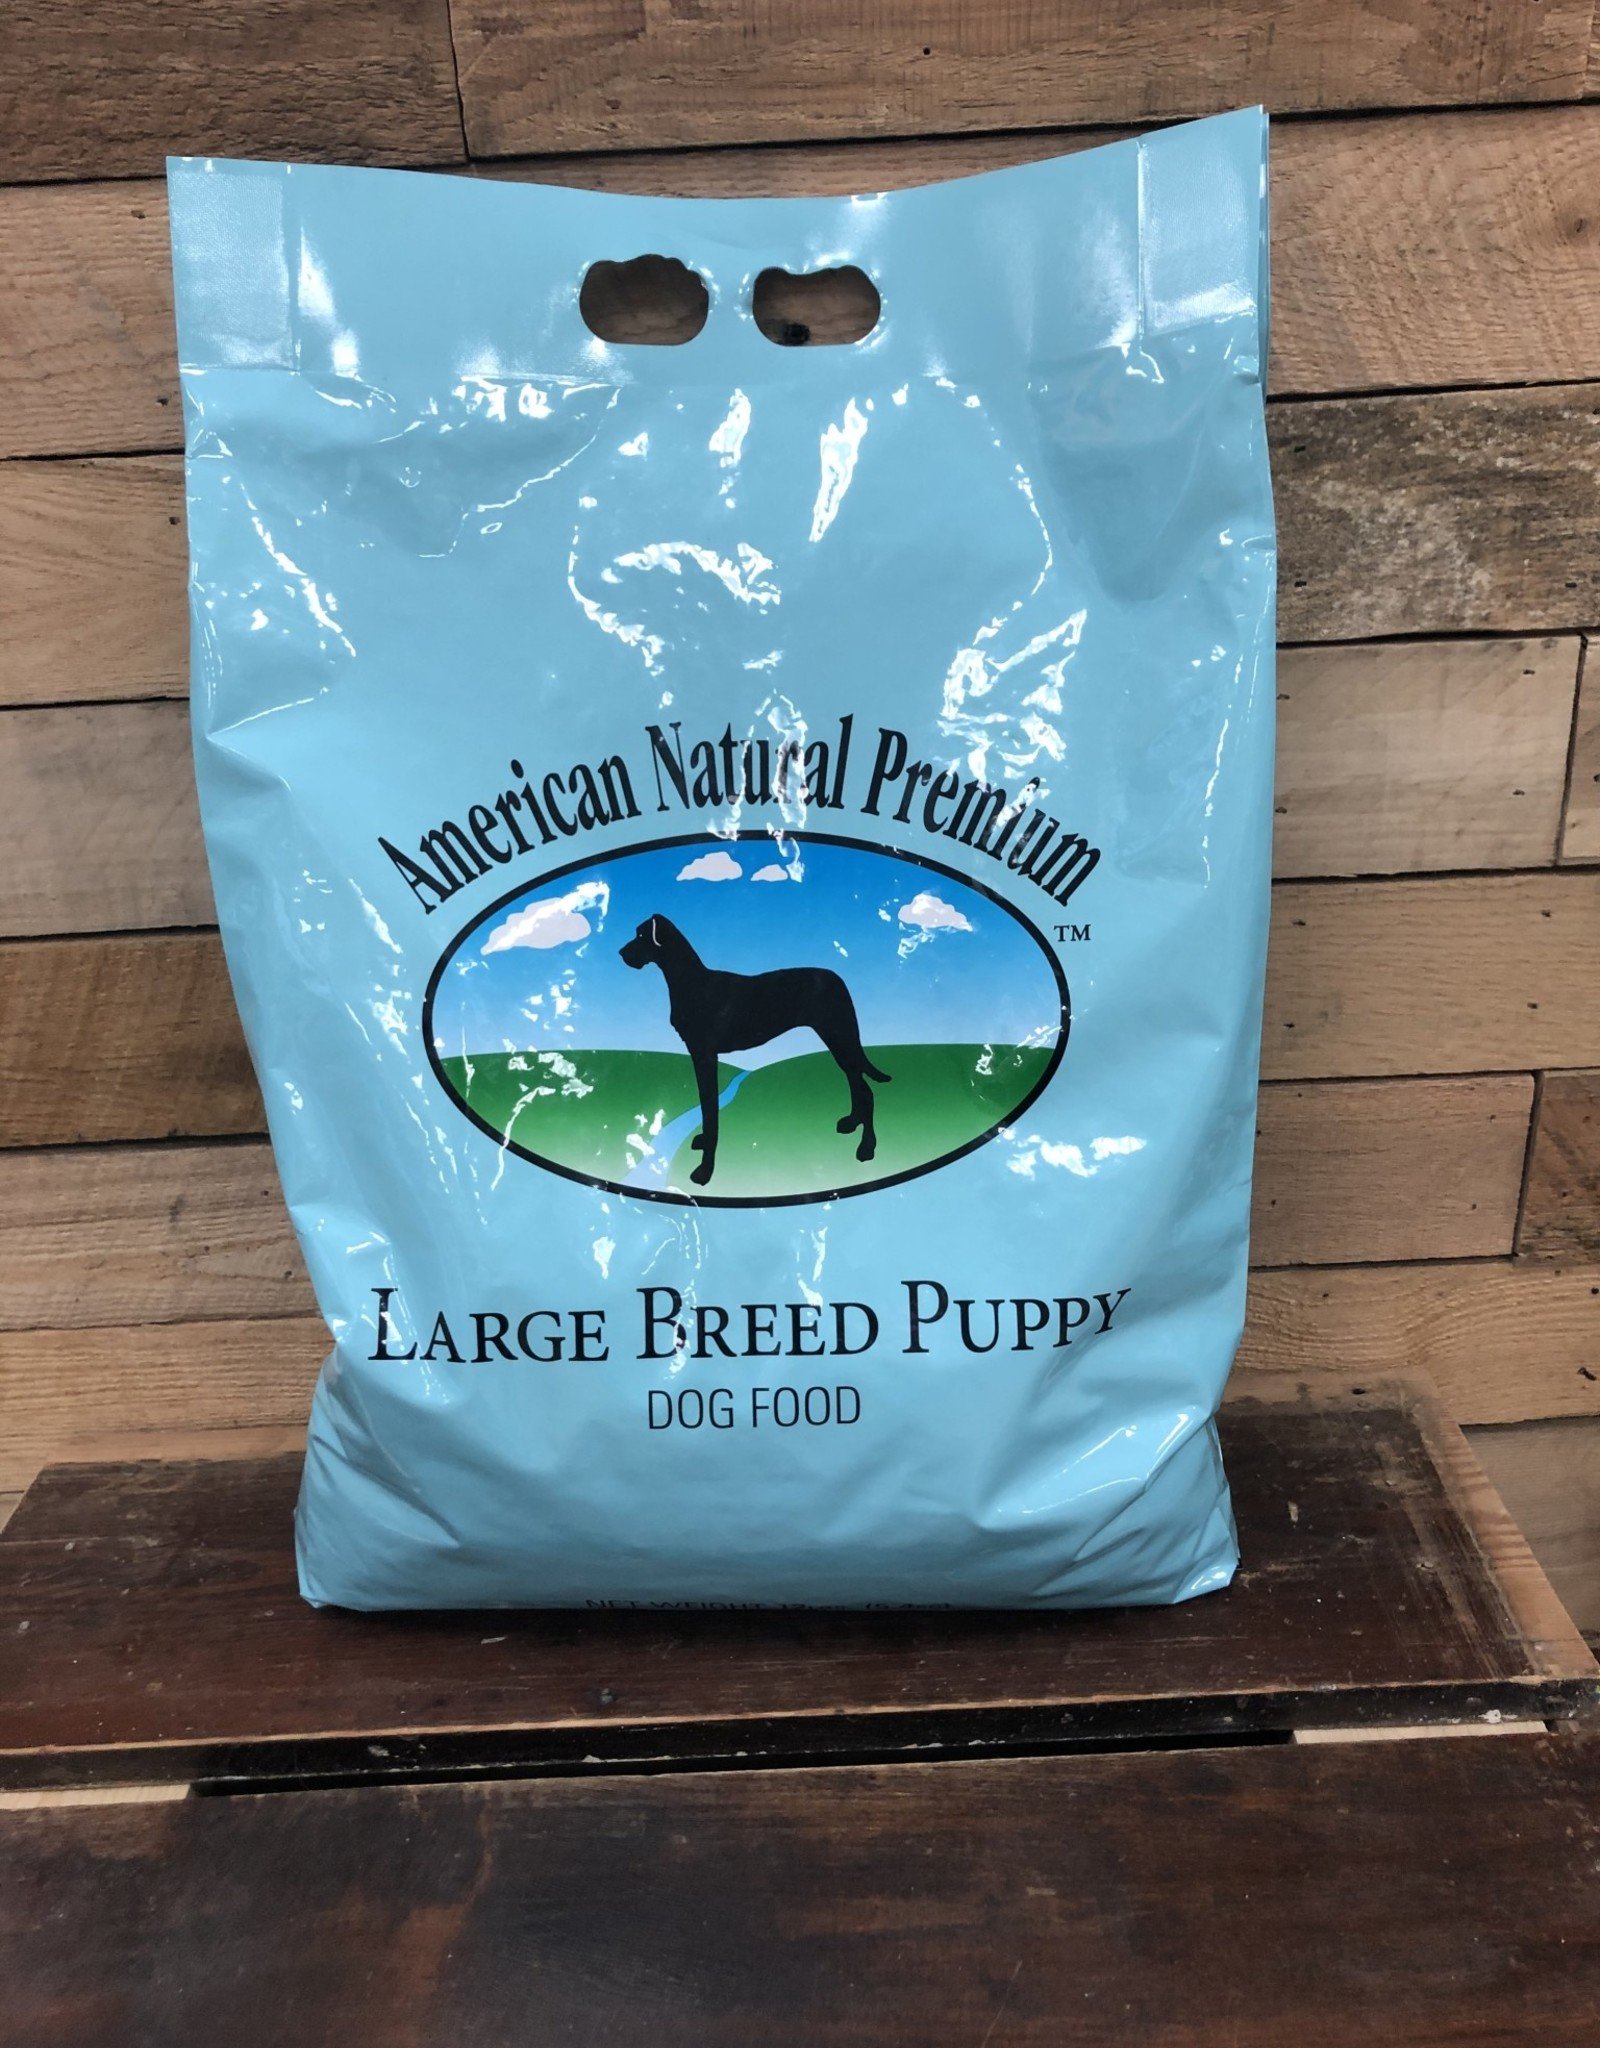 American Natural Premium Large Breed Puppy